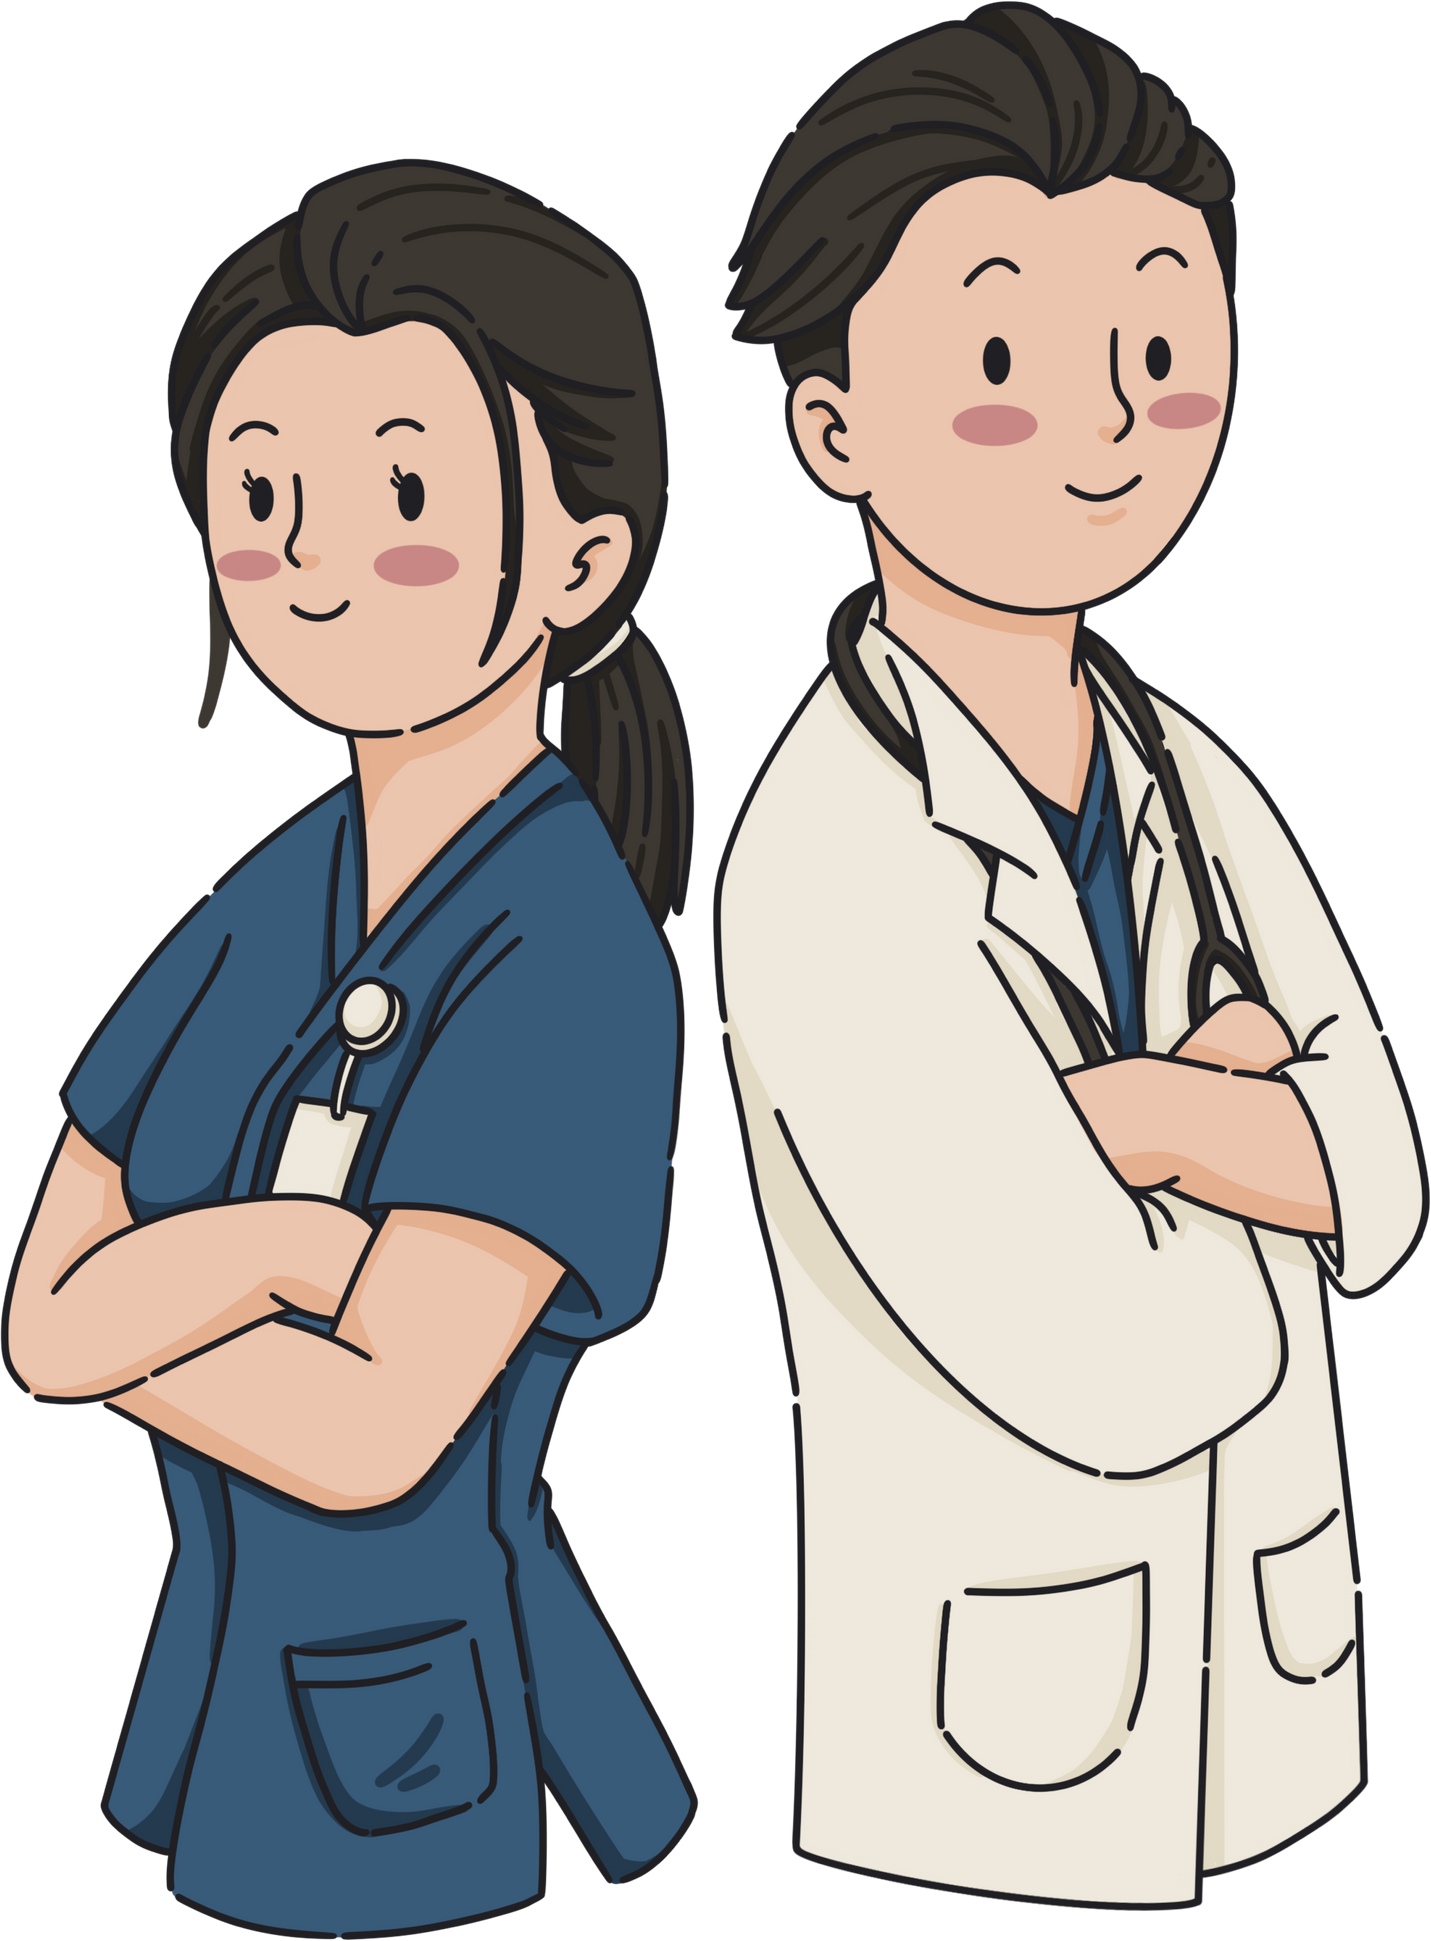 Doctor and Nurse Confident Profile Clean Flat Design Illustration style